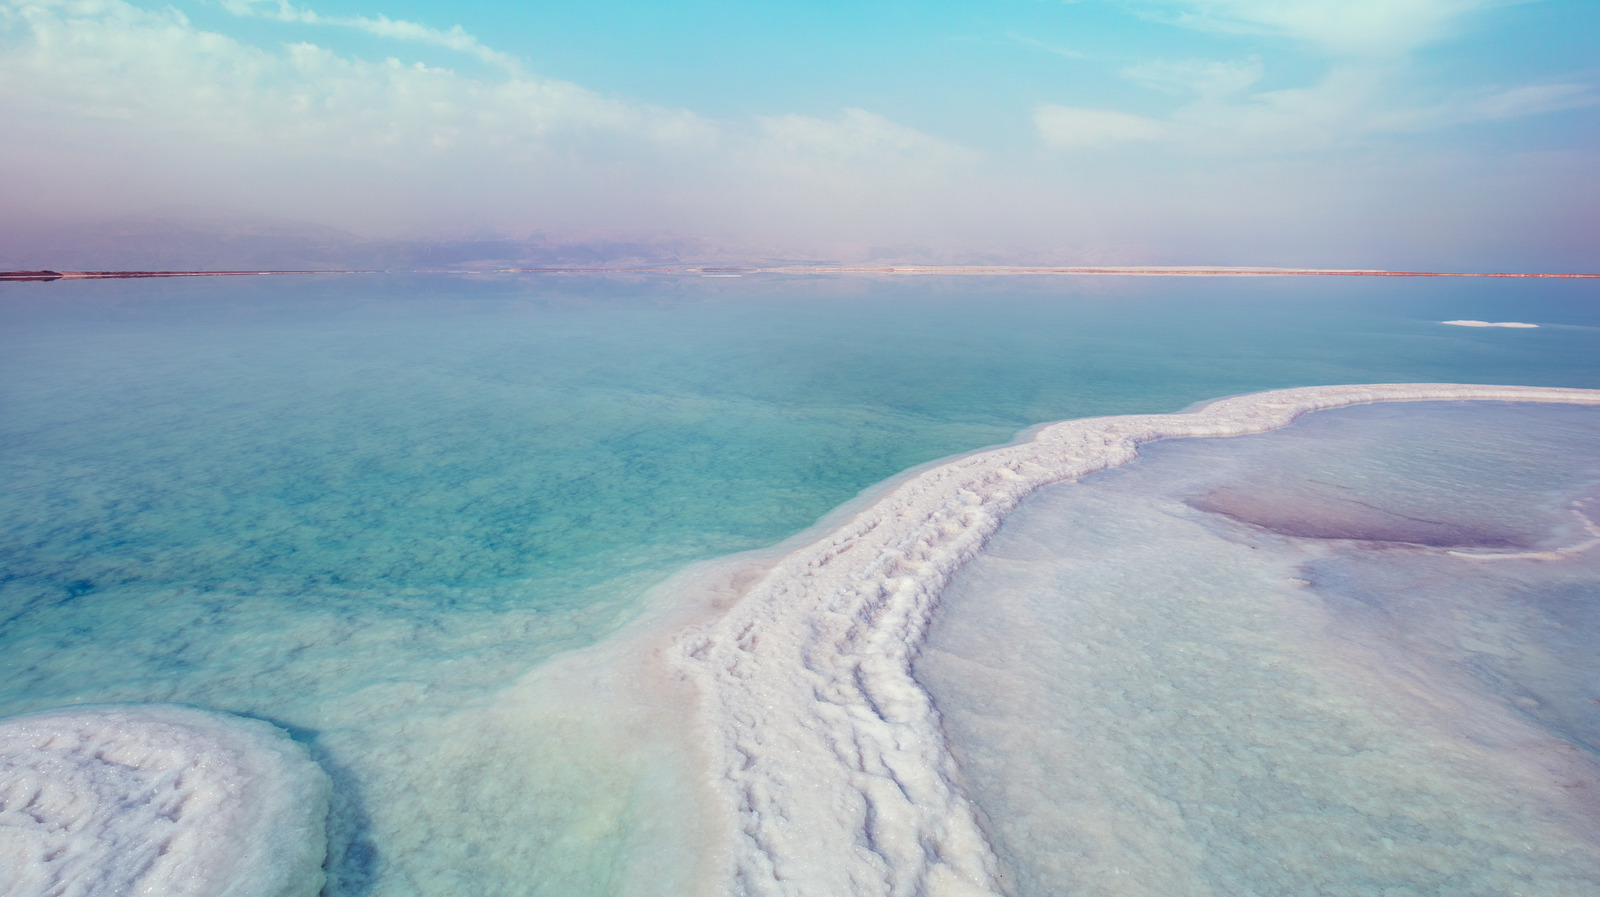 How to Visit the Dead Sea